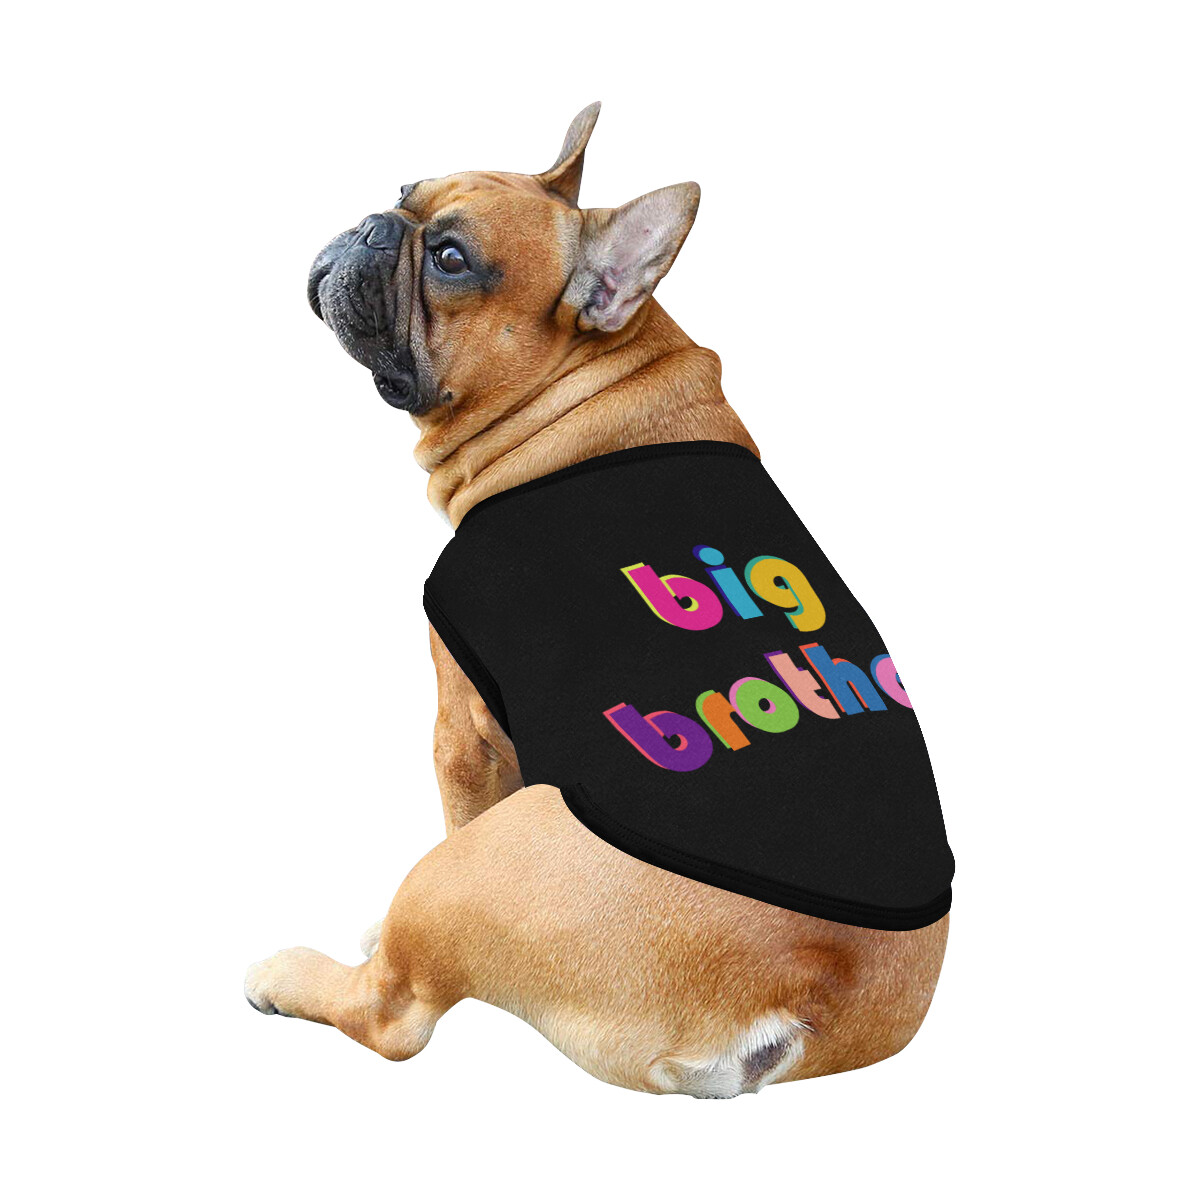 🐕 Big Brother Dog Tank Top, Dog shirt, Dog clothes, Gifts, front back print, 7 sizes XS to 3XL, dog t-shirt, dog t-shirt, dog gift, black